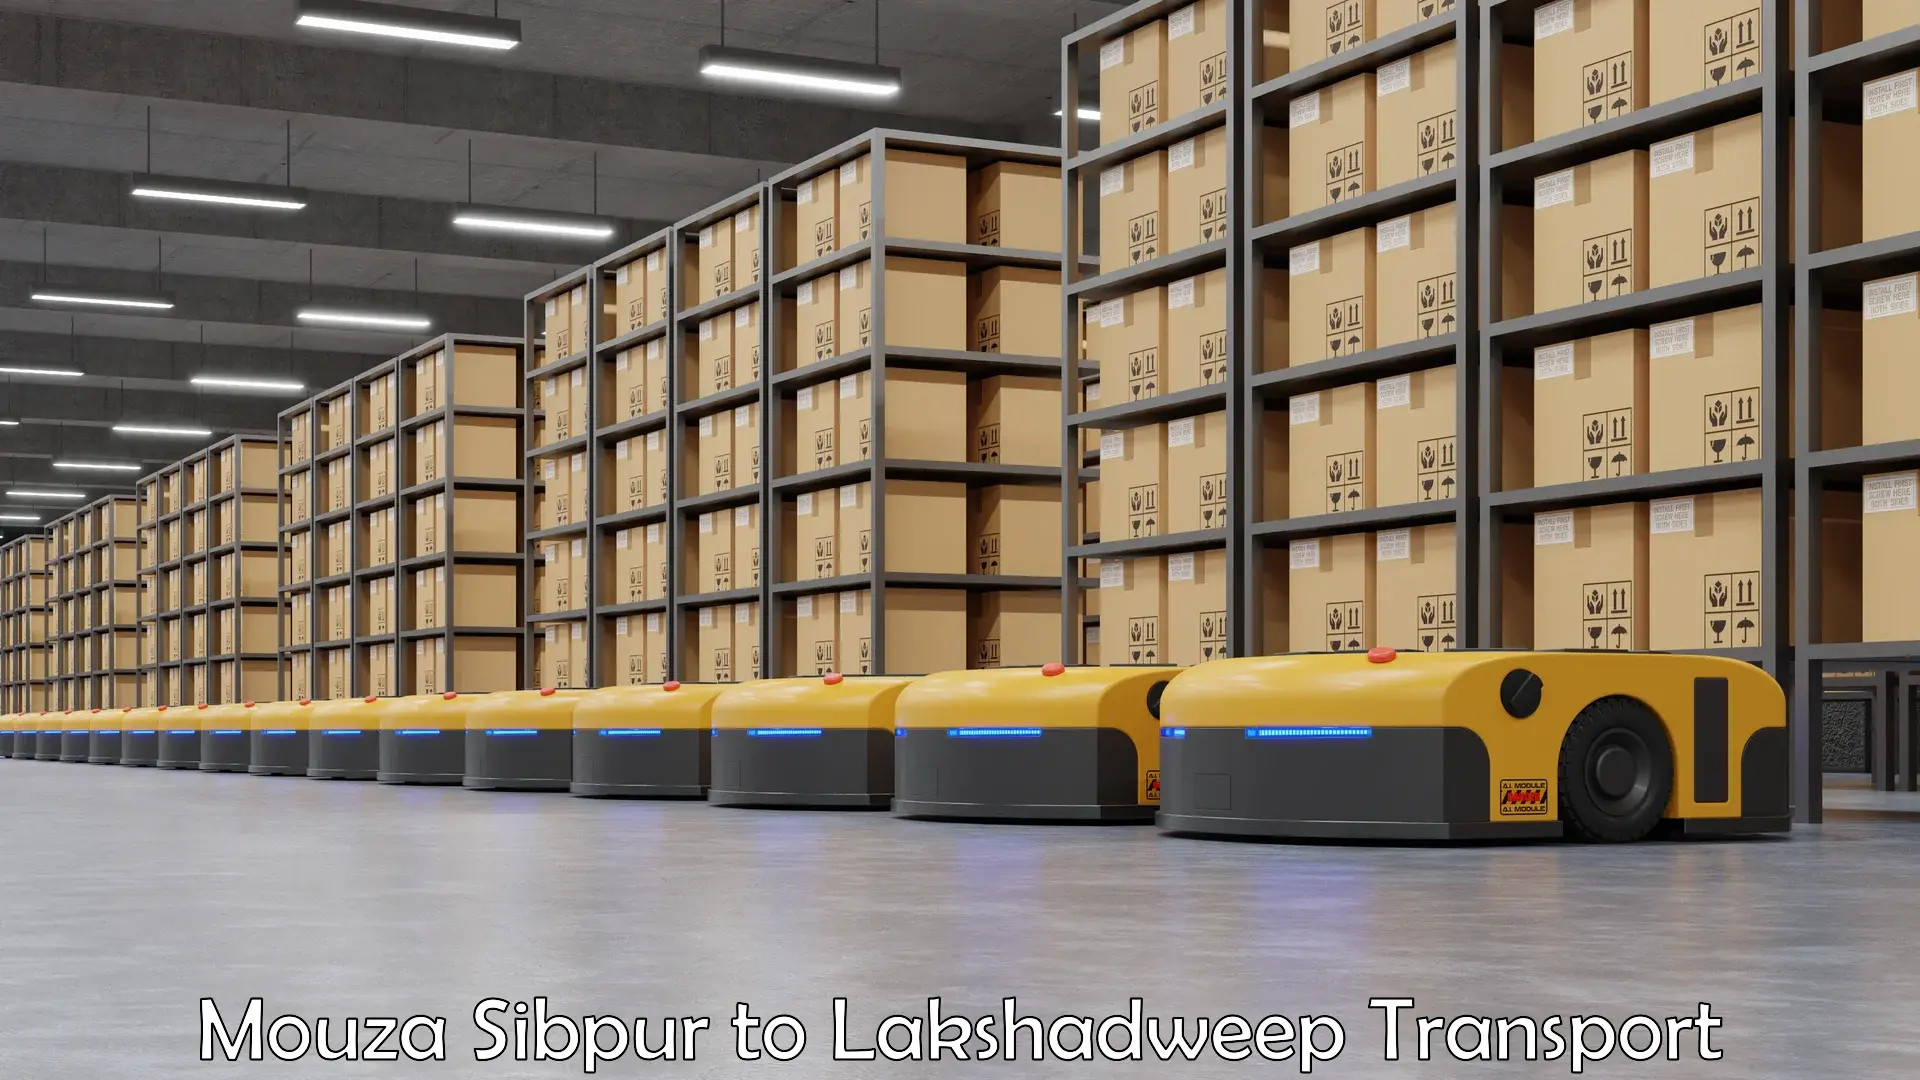 Domestic goods transportation services Mouza Sibpur to Lakshadweep